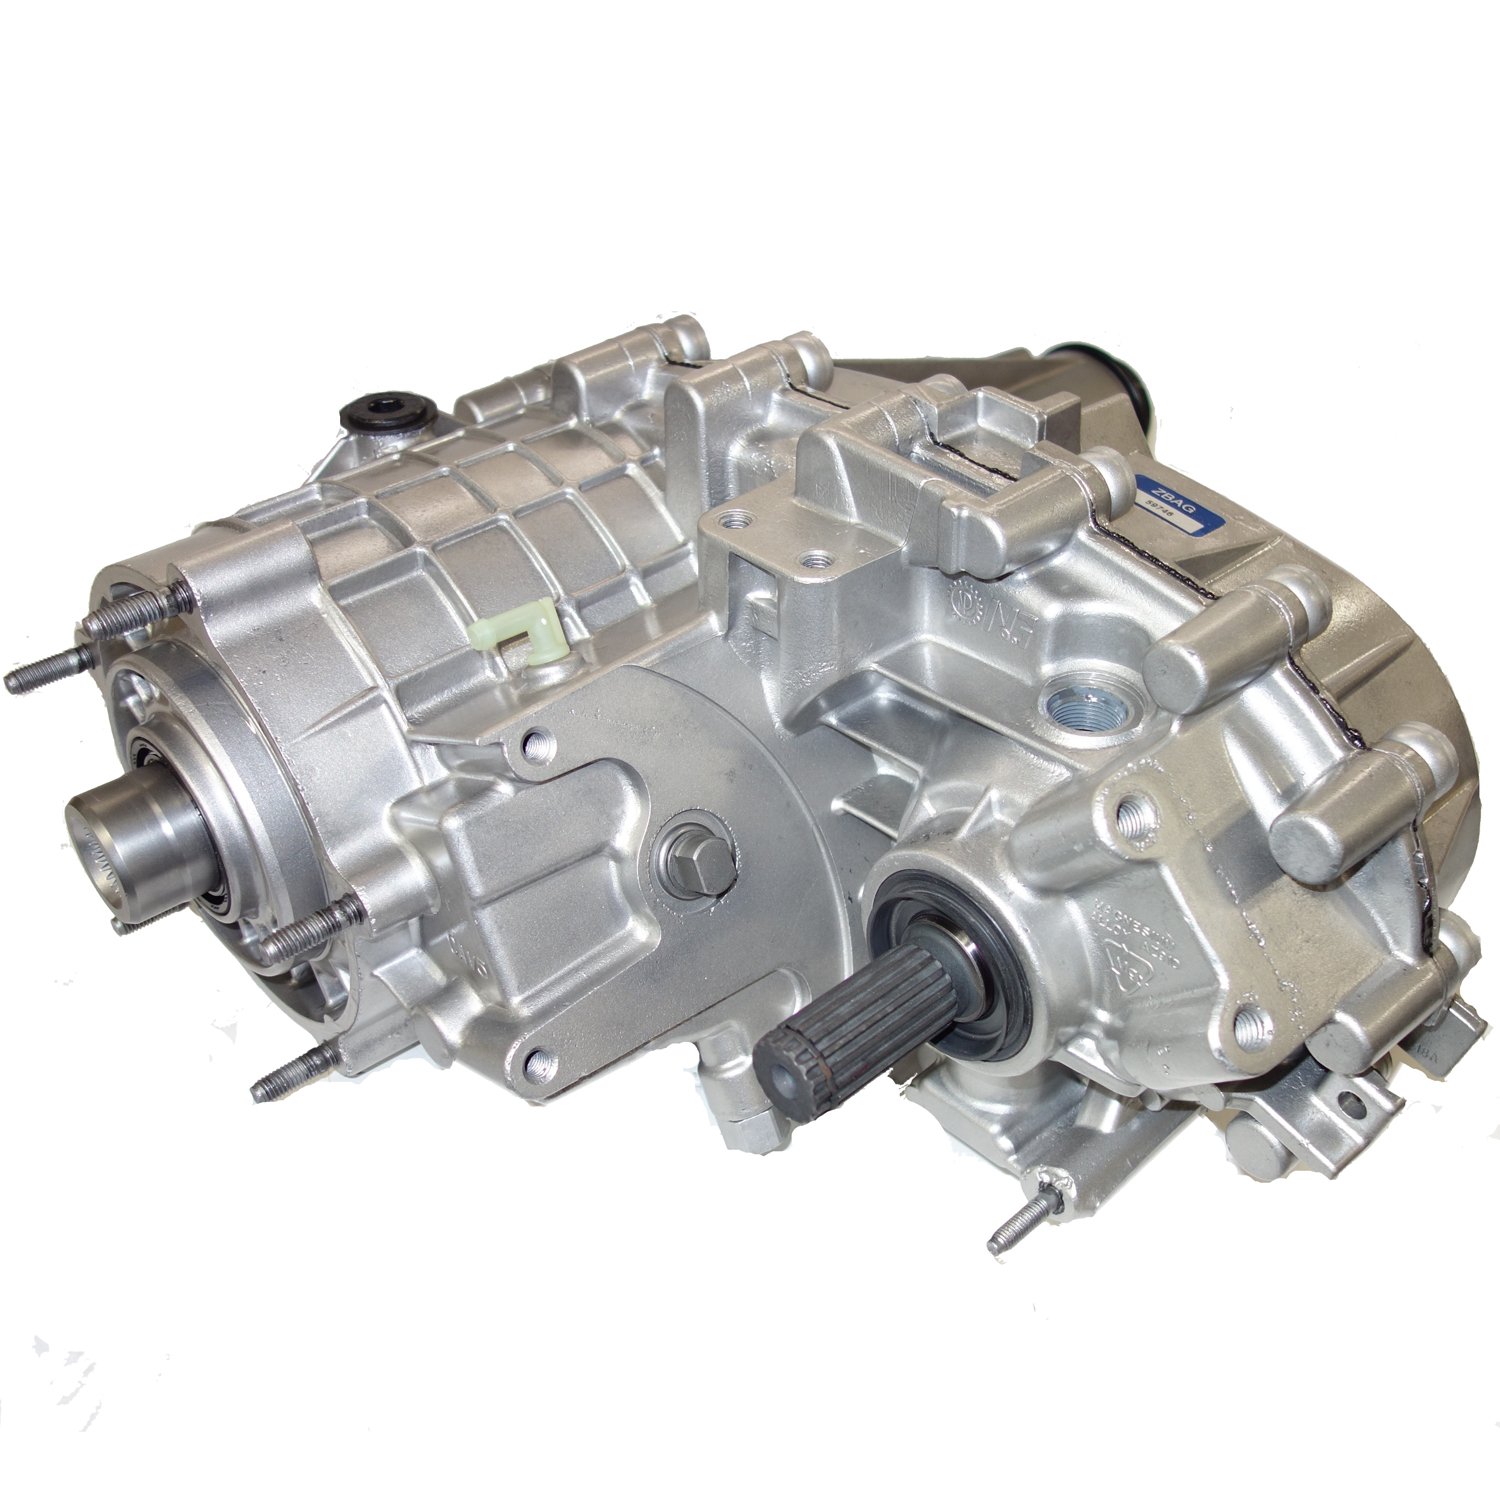 Remanufactured NP136 Transfer Case for GM 99-05 Astro